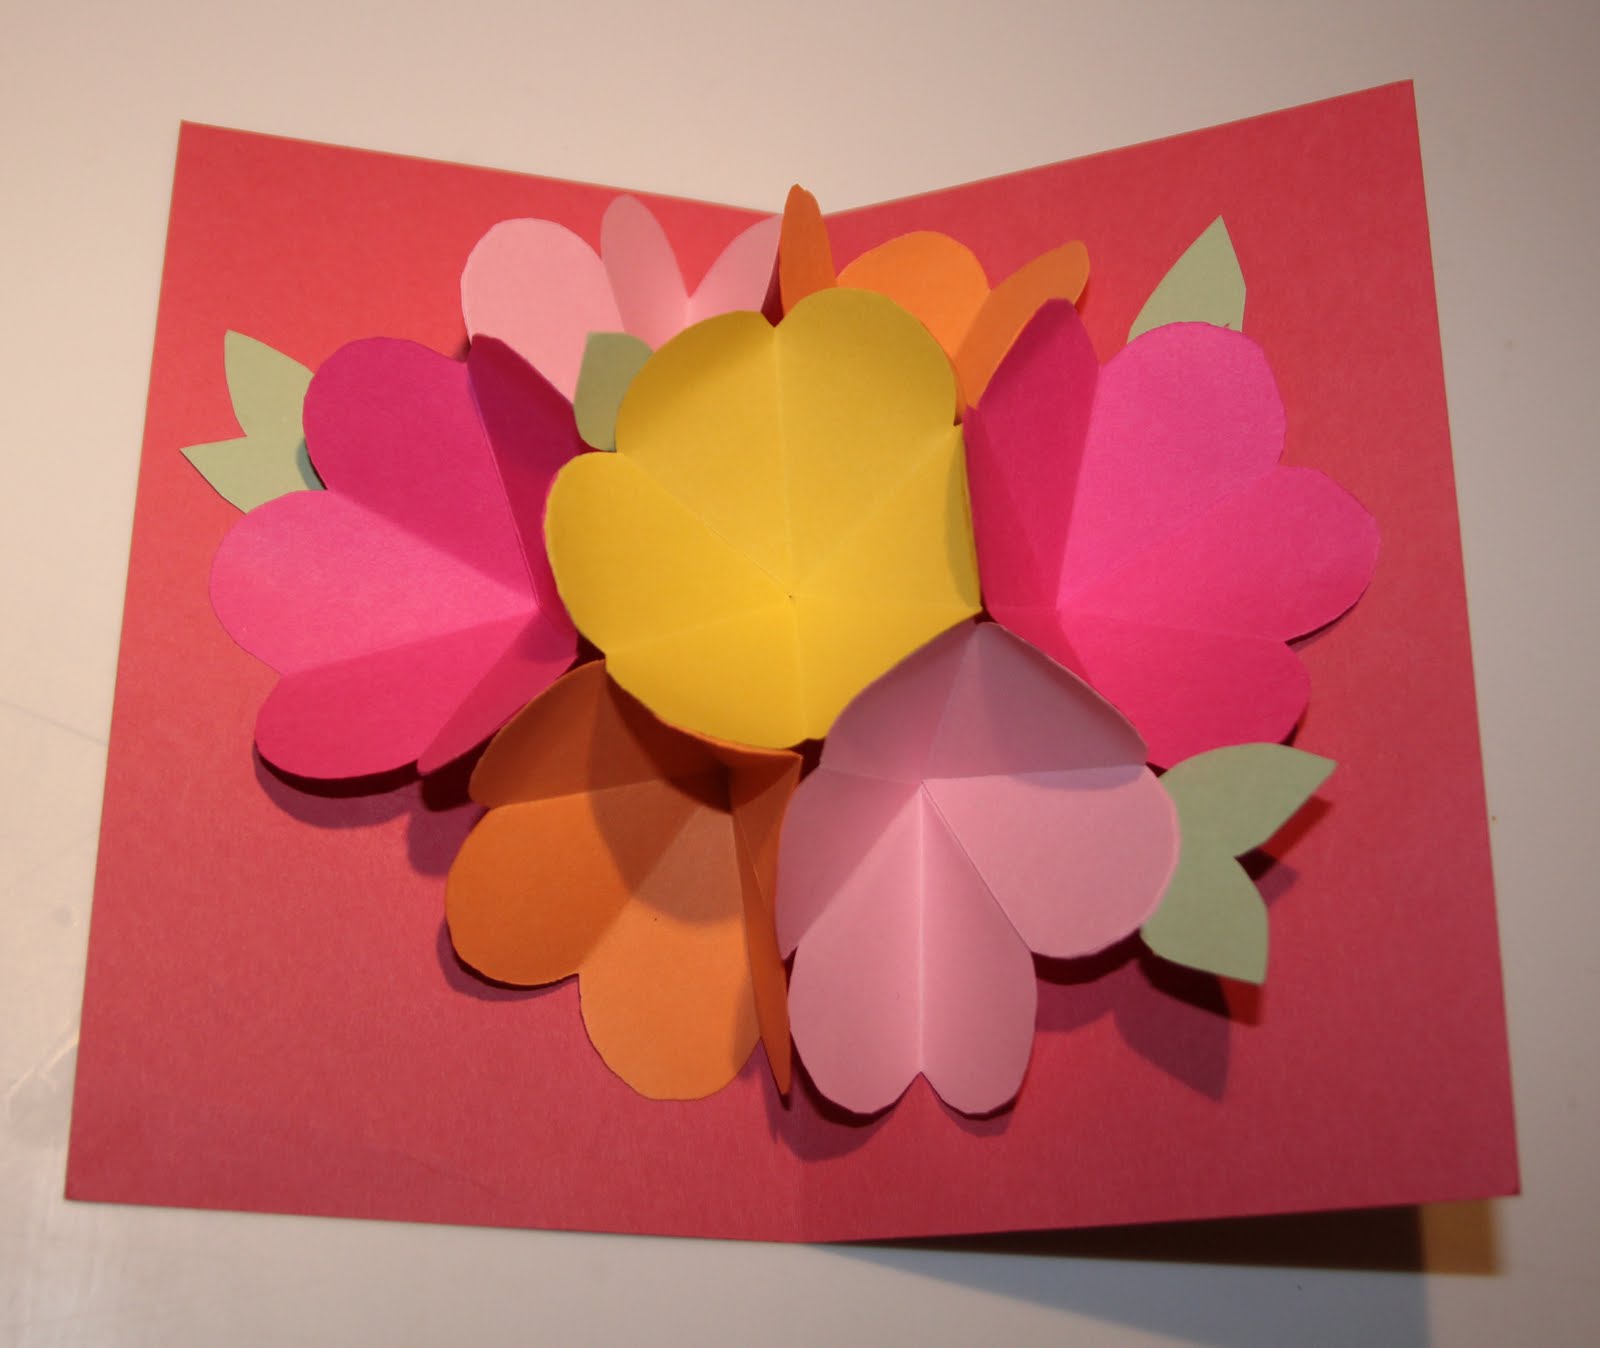 beyond-betavia-mother-s-day-pop-up-card